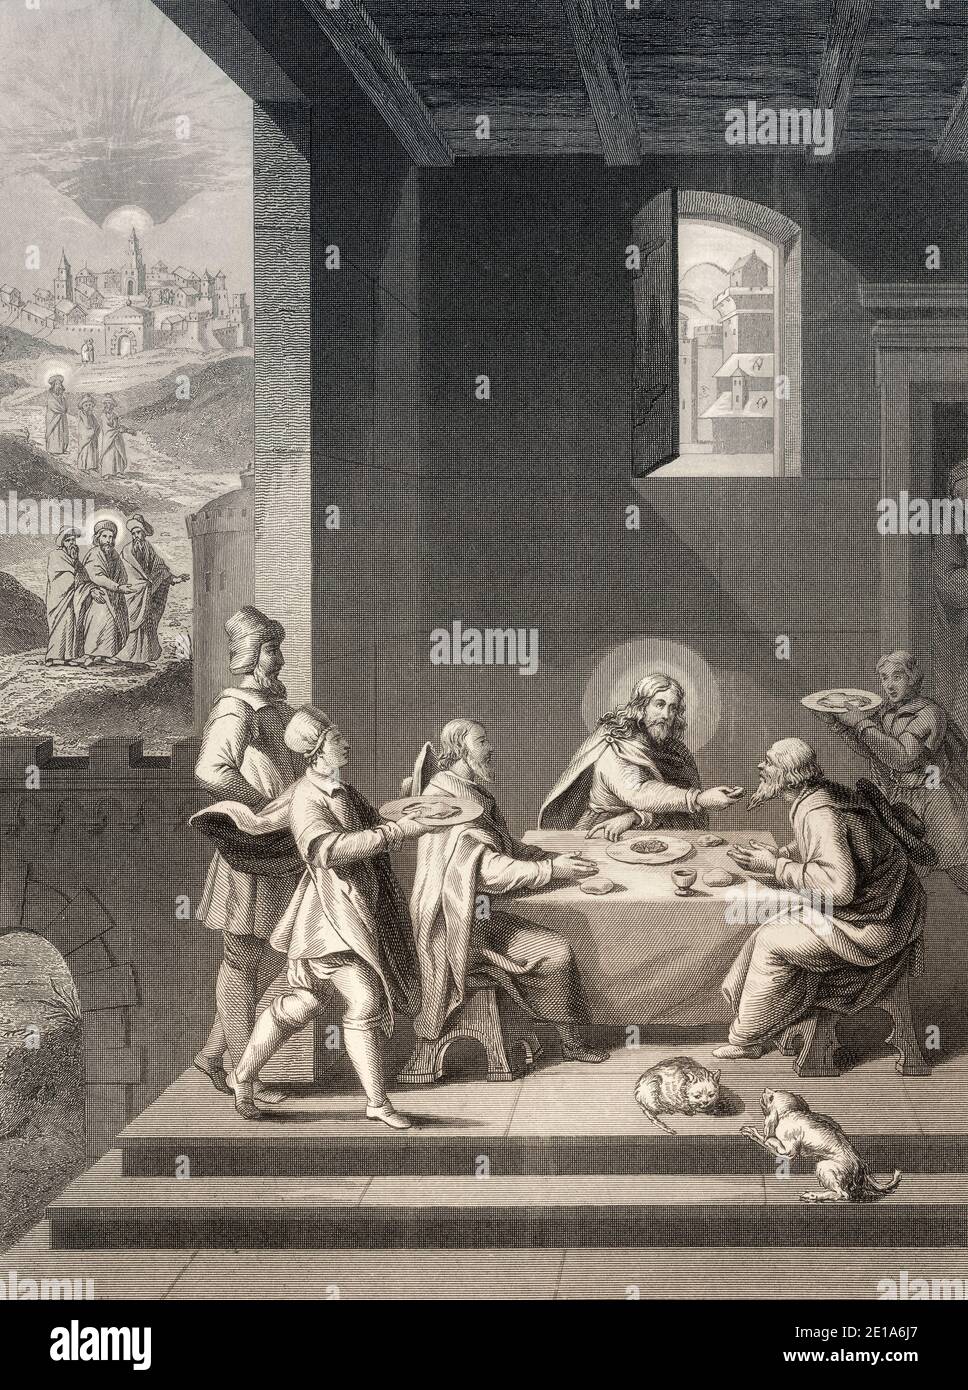 The road to Emmaus appearance, New Testament, steel engraving 1853, digitally restored Stock Photo